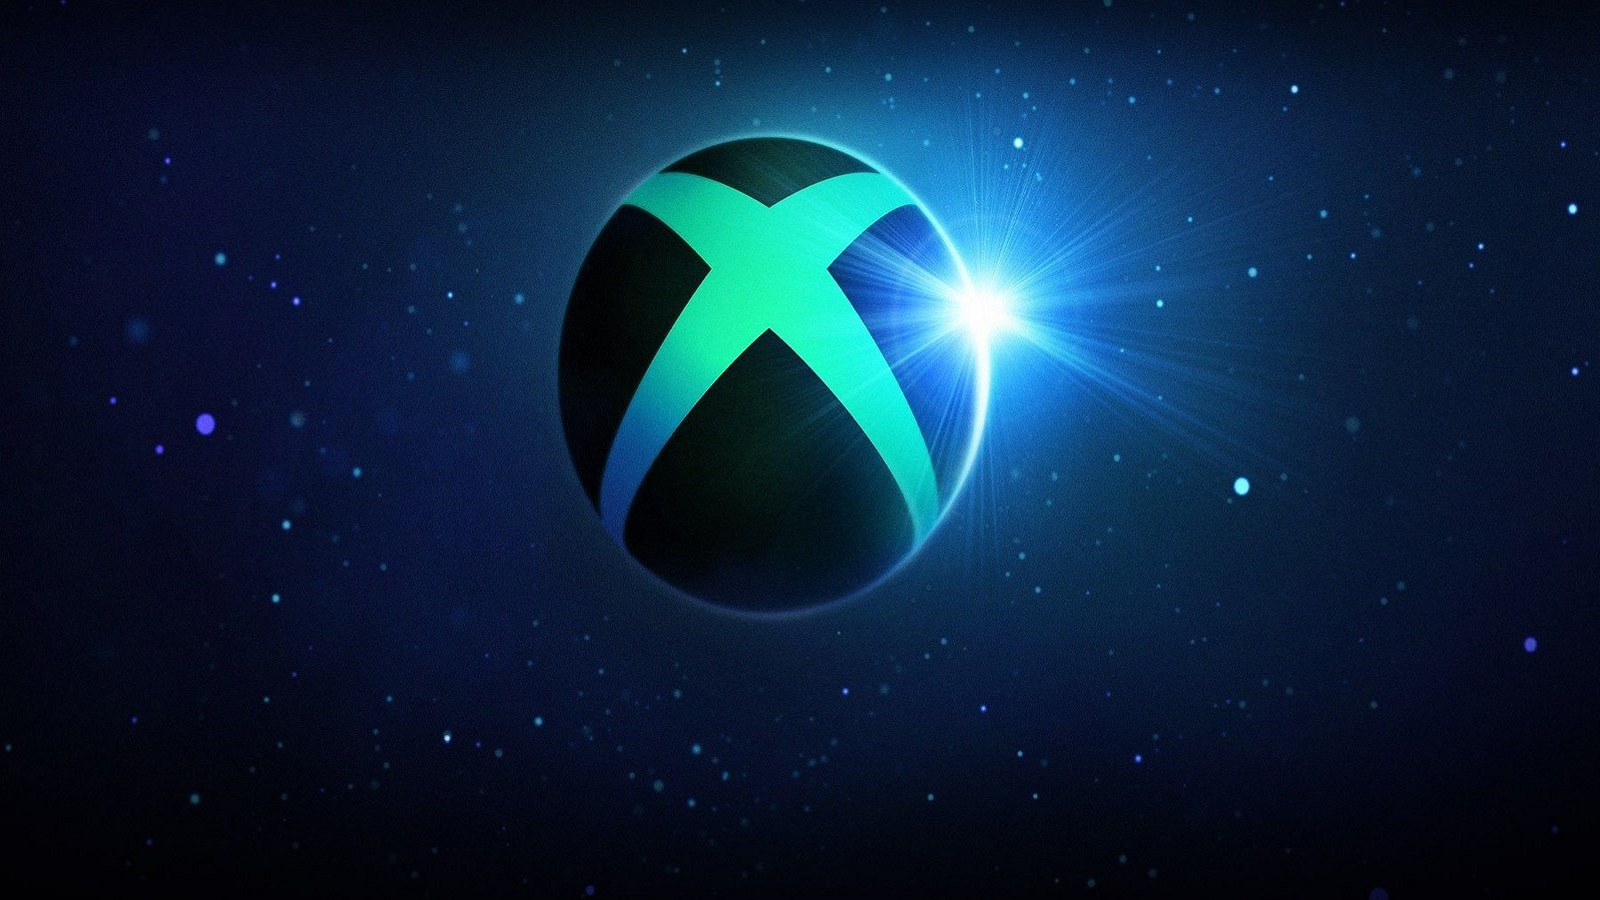 Every Xbox and Bethesda 2022 Showcase Reveal: From Starfield Gameplay to  Diablo 4 - CNET